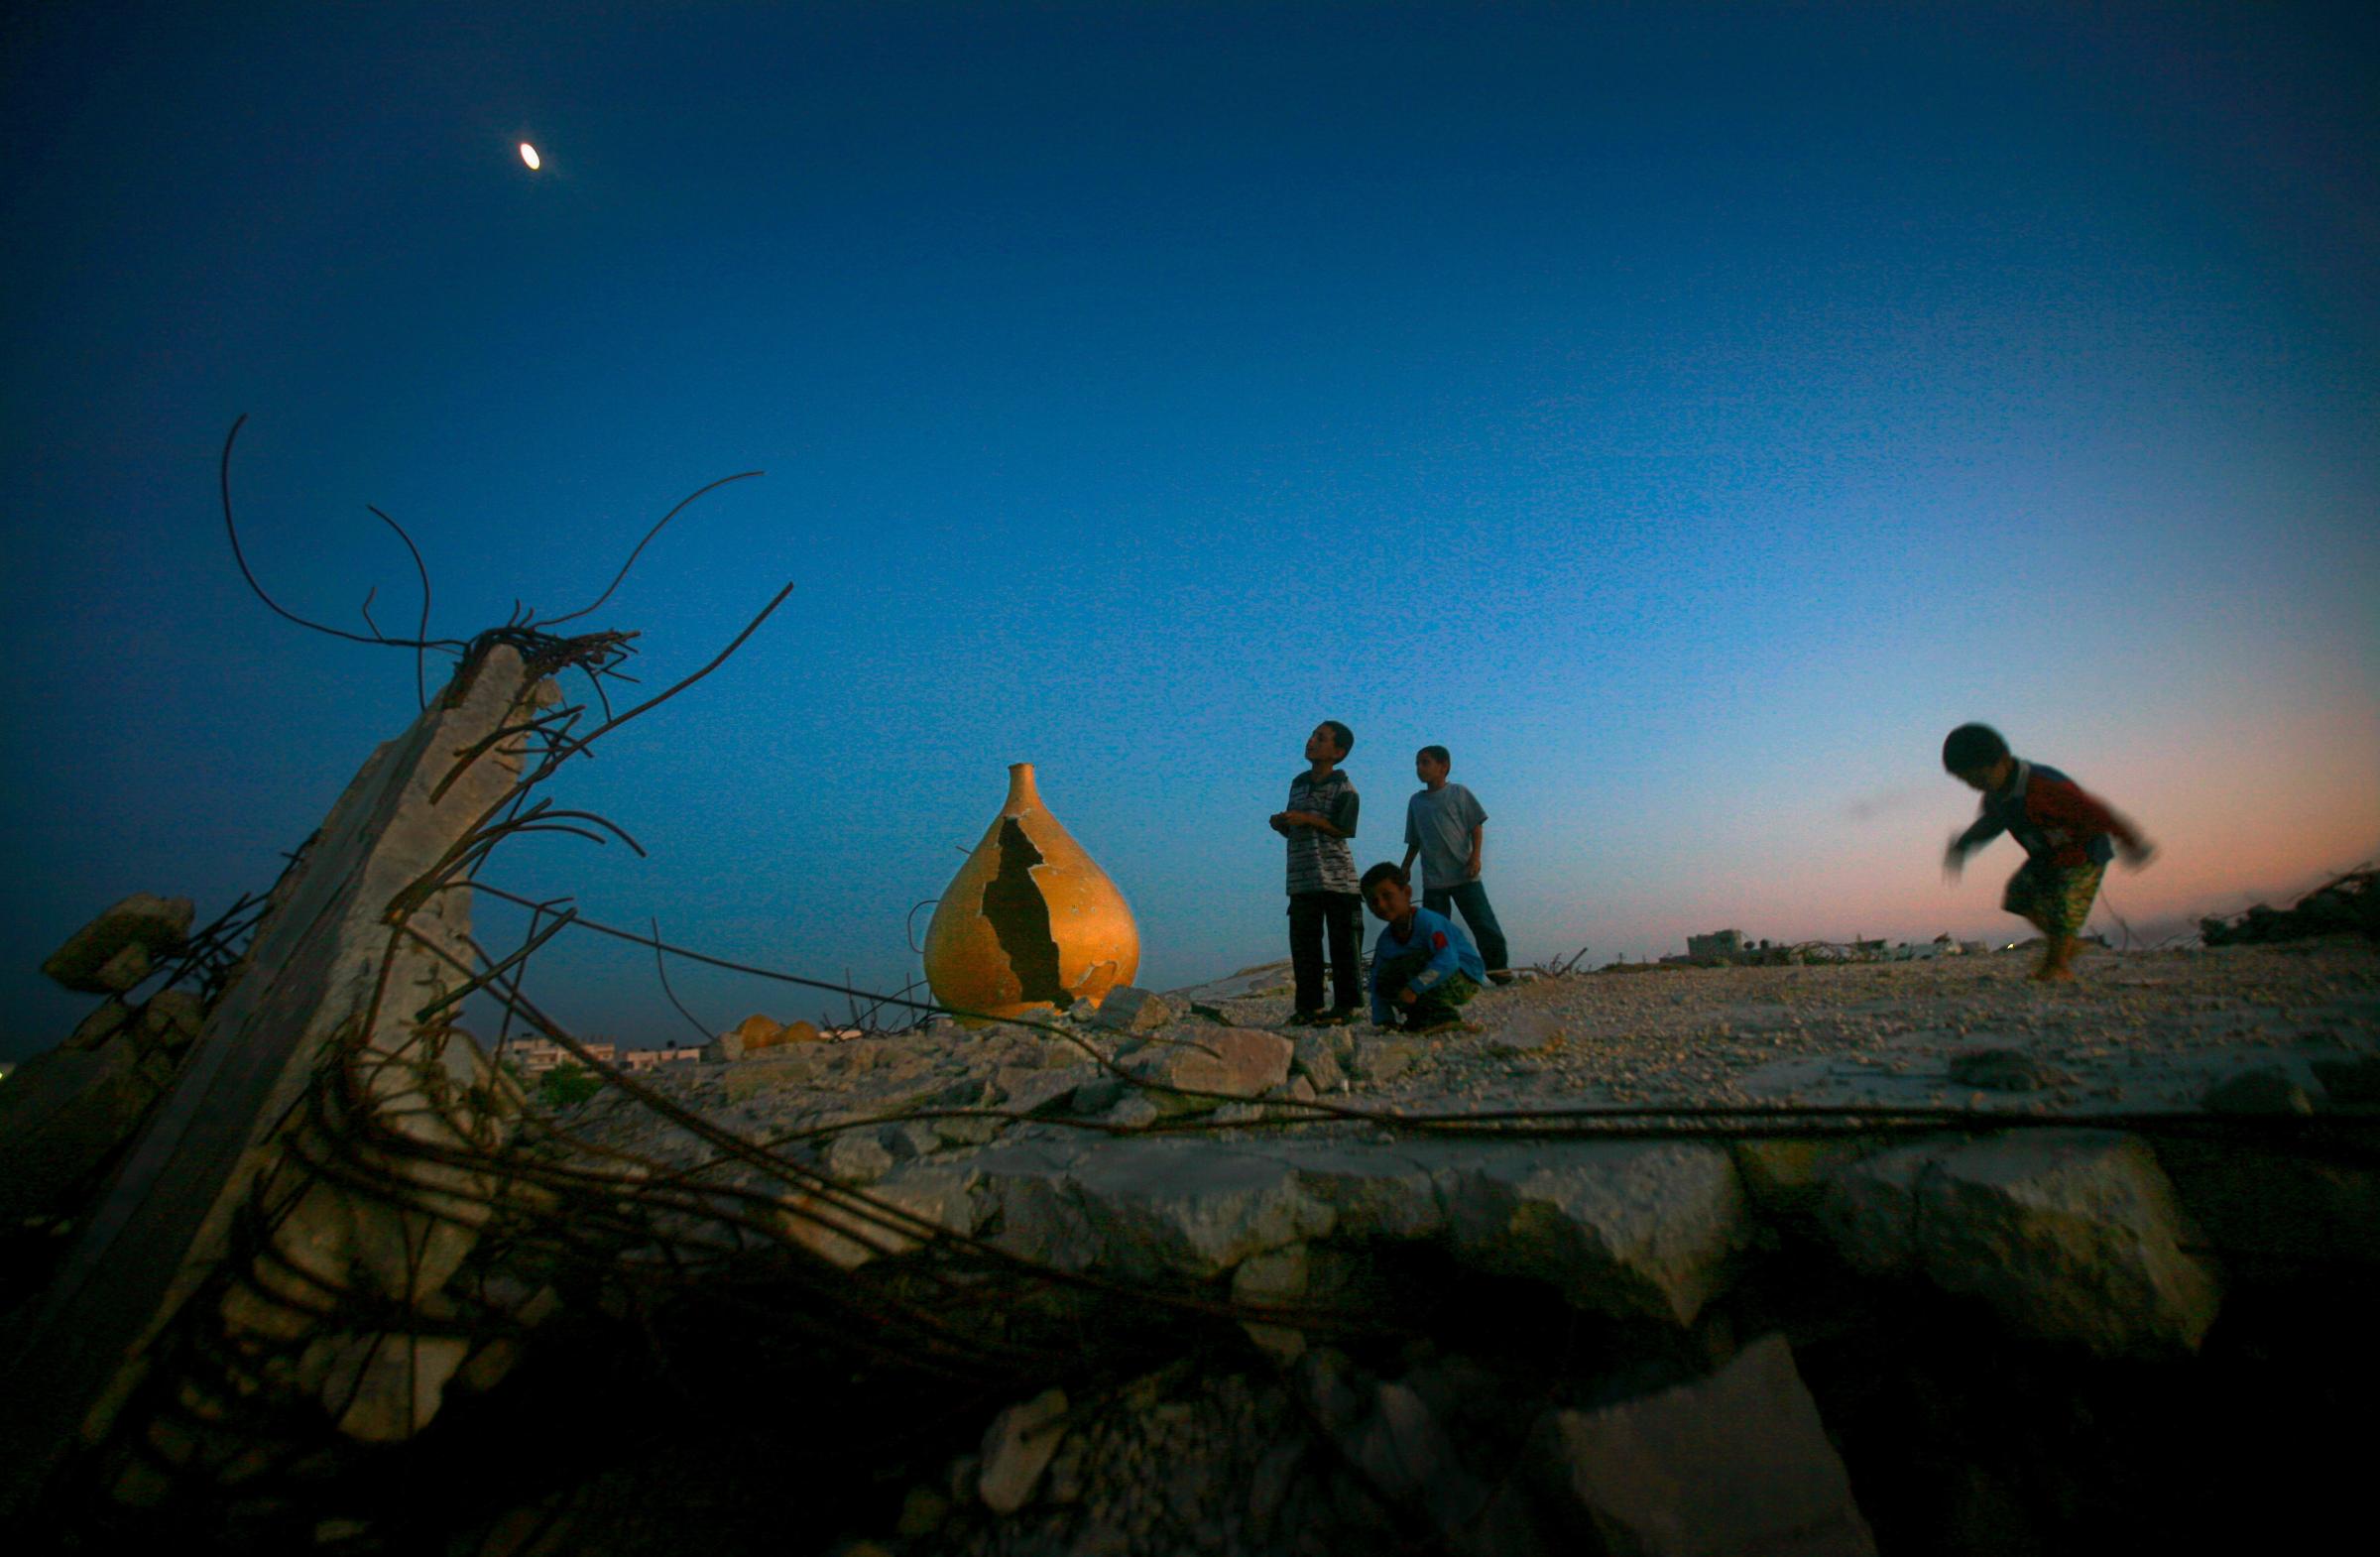 What Lies Beneath The Rubble  - GAZA STRIP, PALESTINE.Palestinian children play in the...